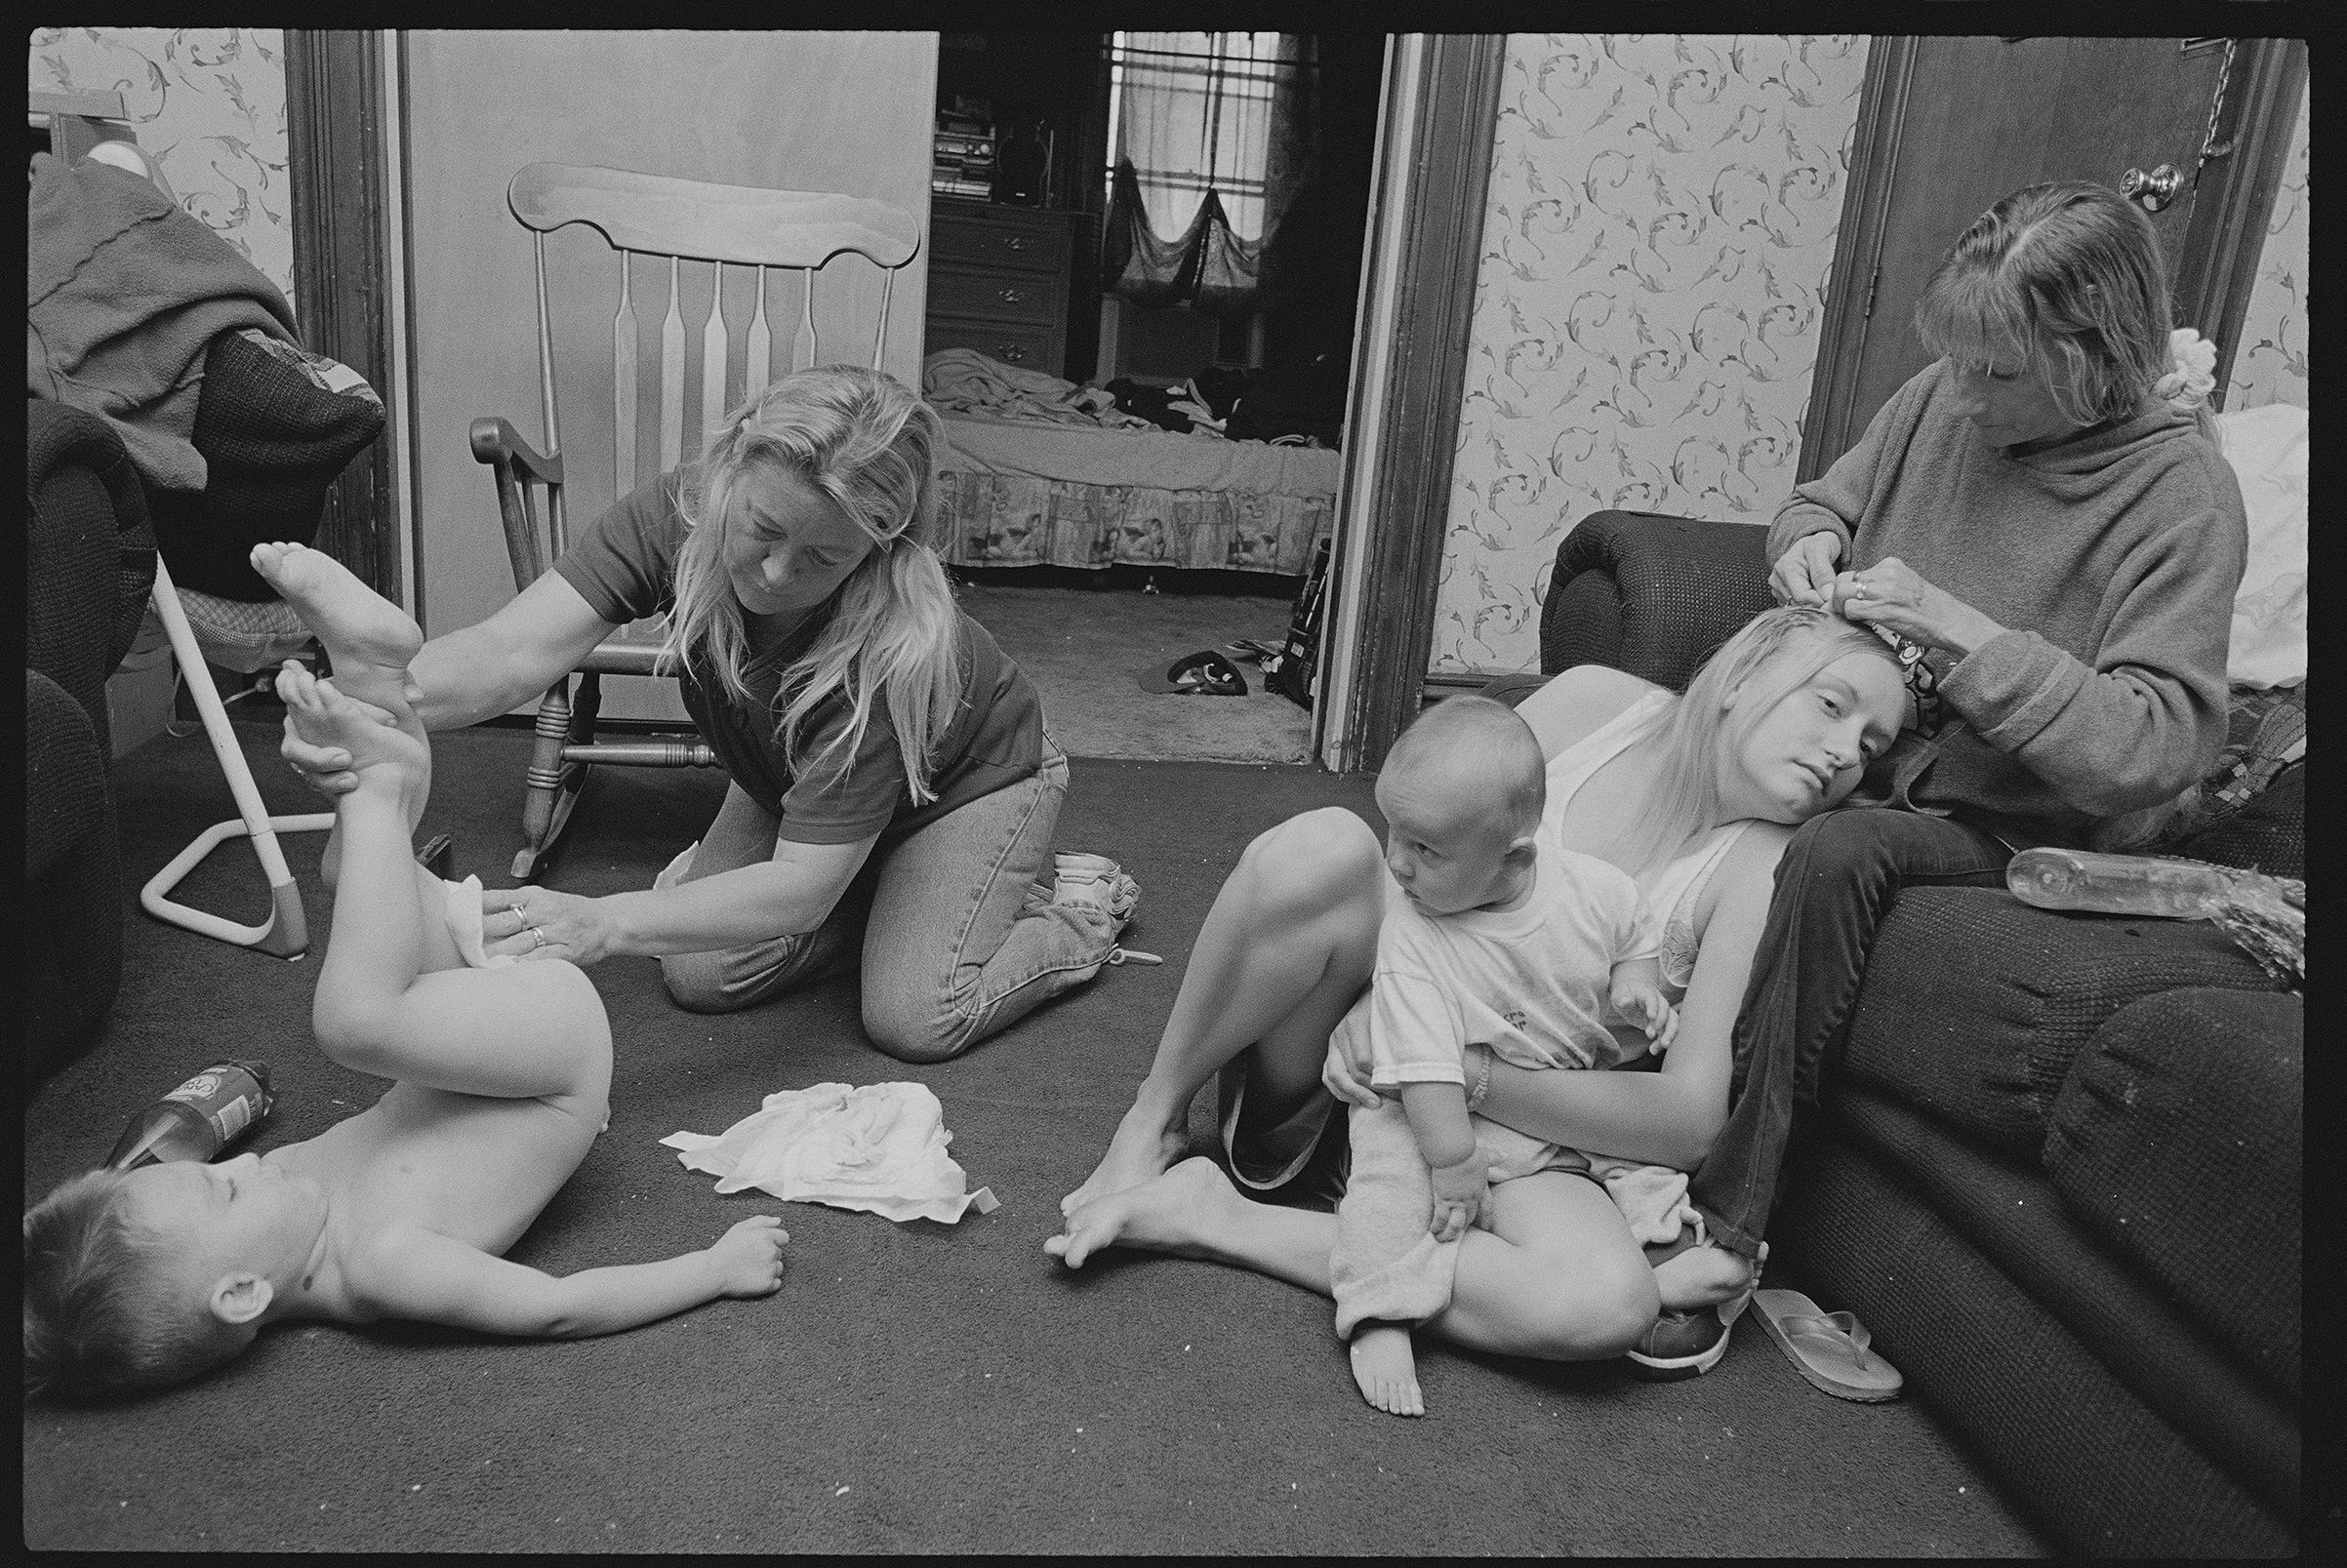 Tony watches 'Nanny Rose' Hill change his uncle Little Jesse’s diaper while Deb Stocklas braids her daughter Kayla’s hair in 2004. "Little Jesse and Tony were born less than two years apart and have always competed for the attention that comes with being the baby of the family," says Kenneally. (Brenda Ann Kenneally)